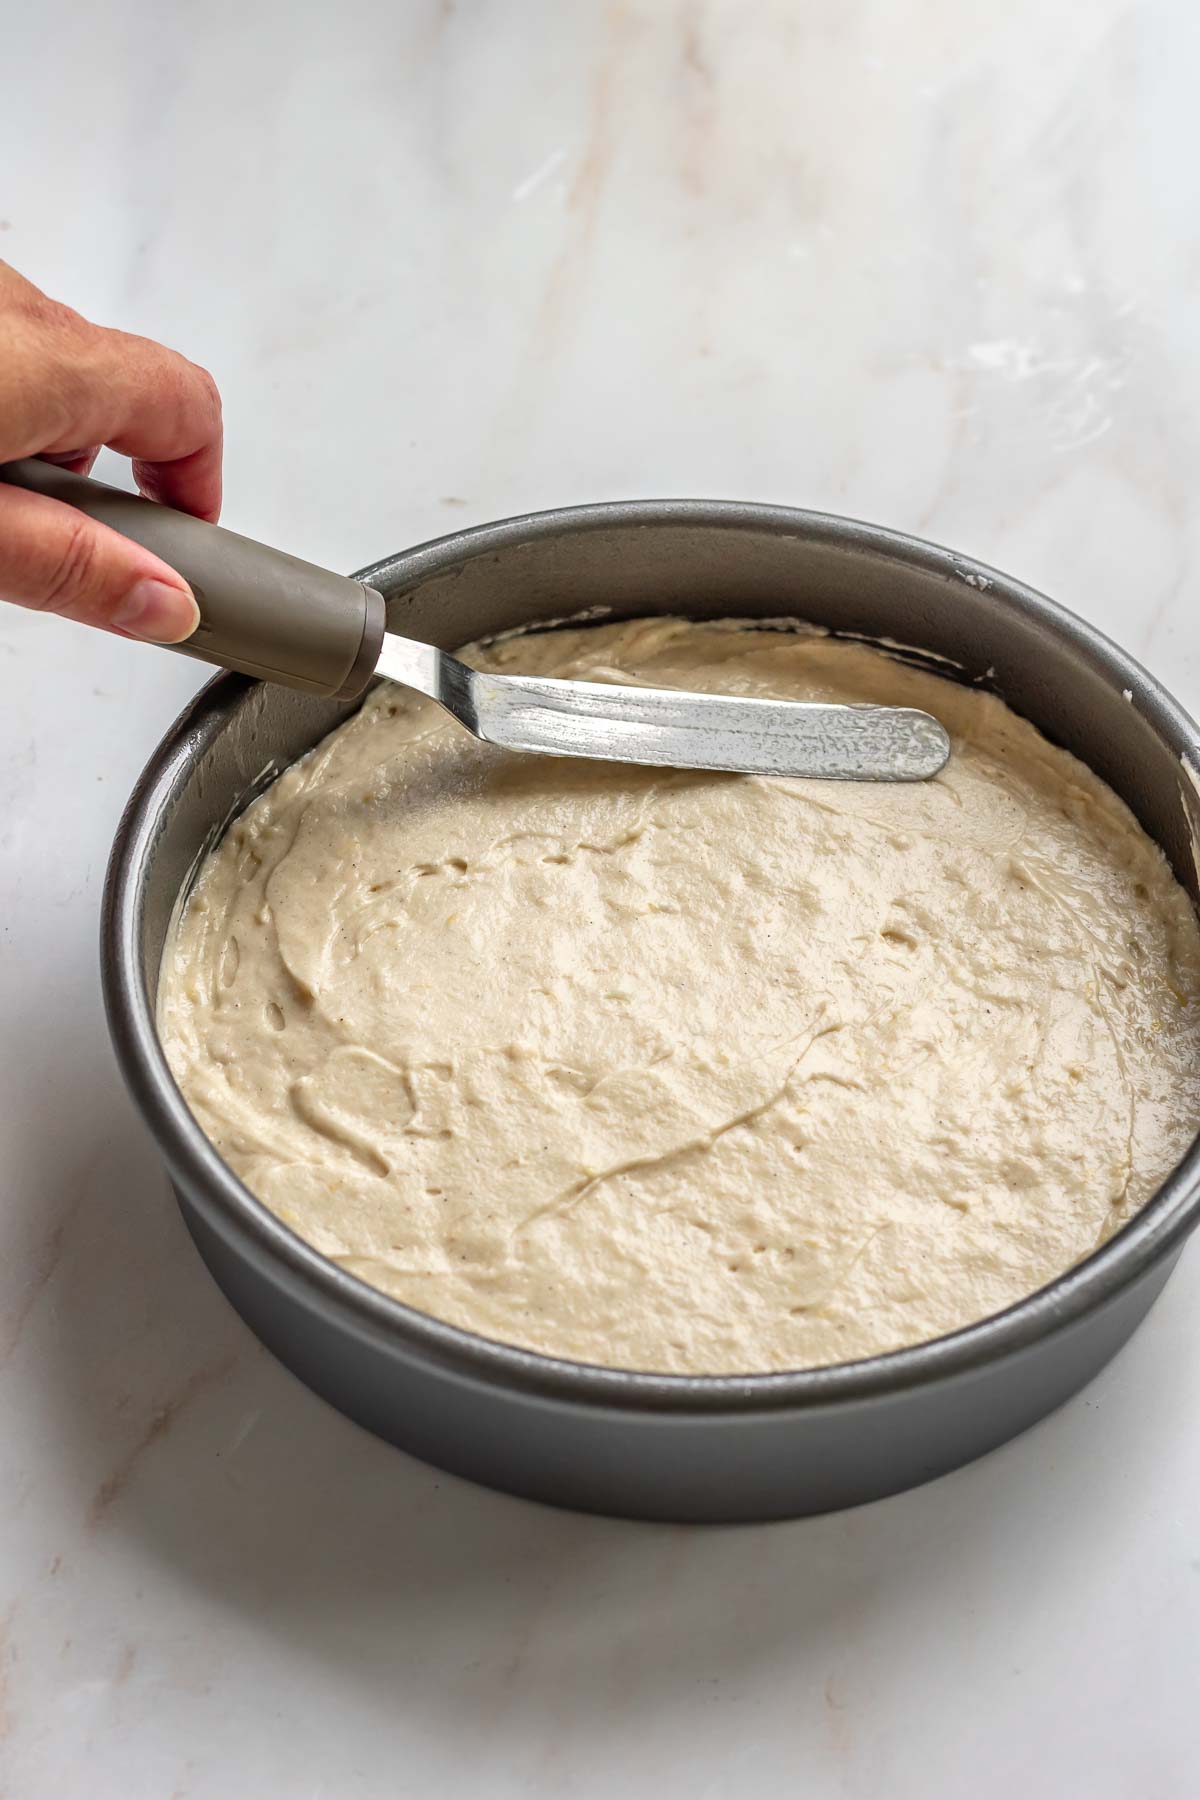 A hand uses an offset spatula to spread cake batter into a cake pan.